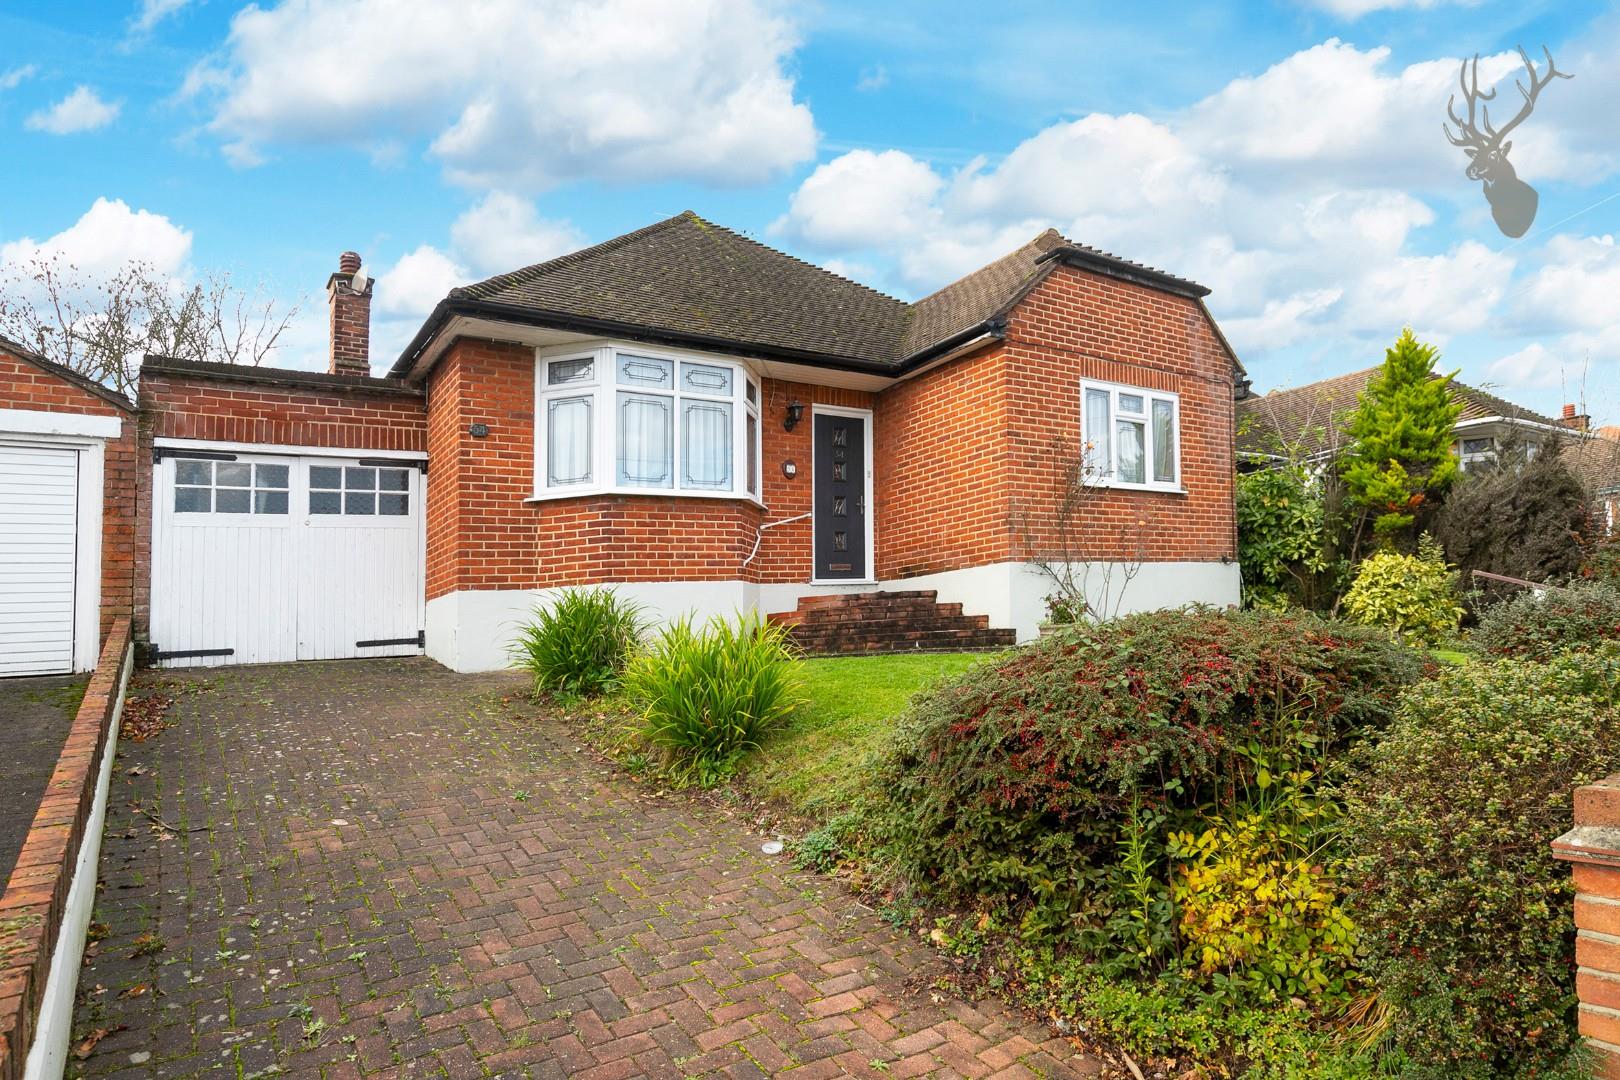 Similar Property: Chalet Bungalow - Detached in Chigwell